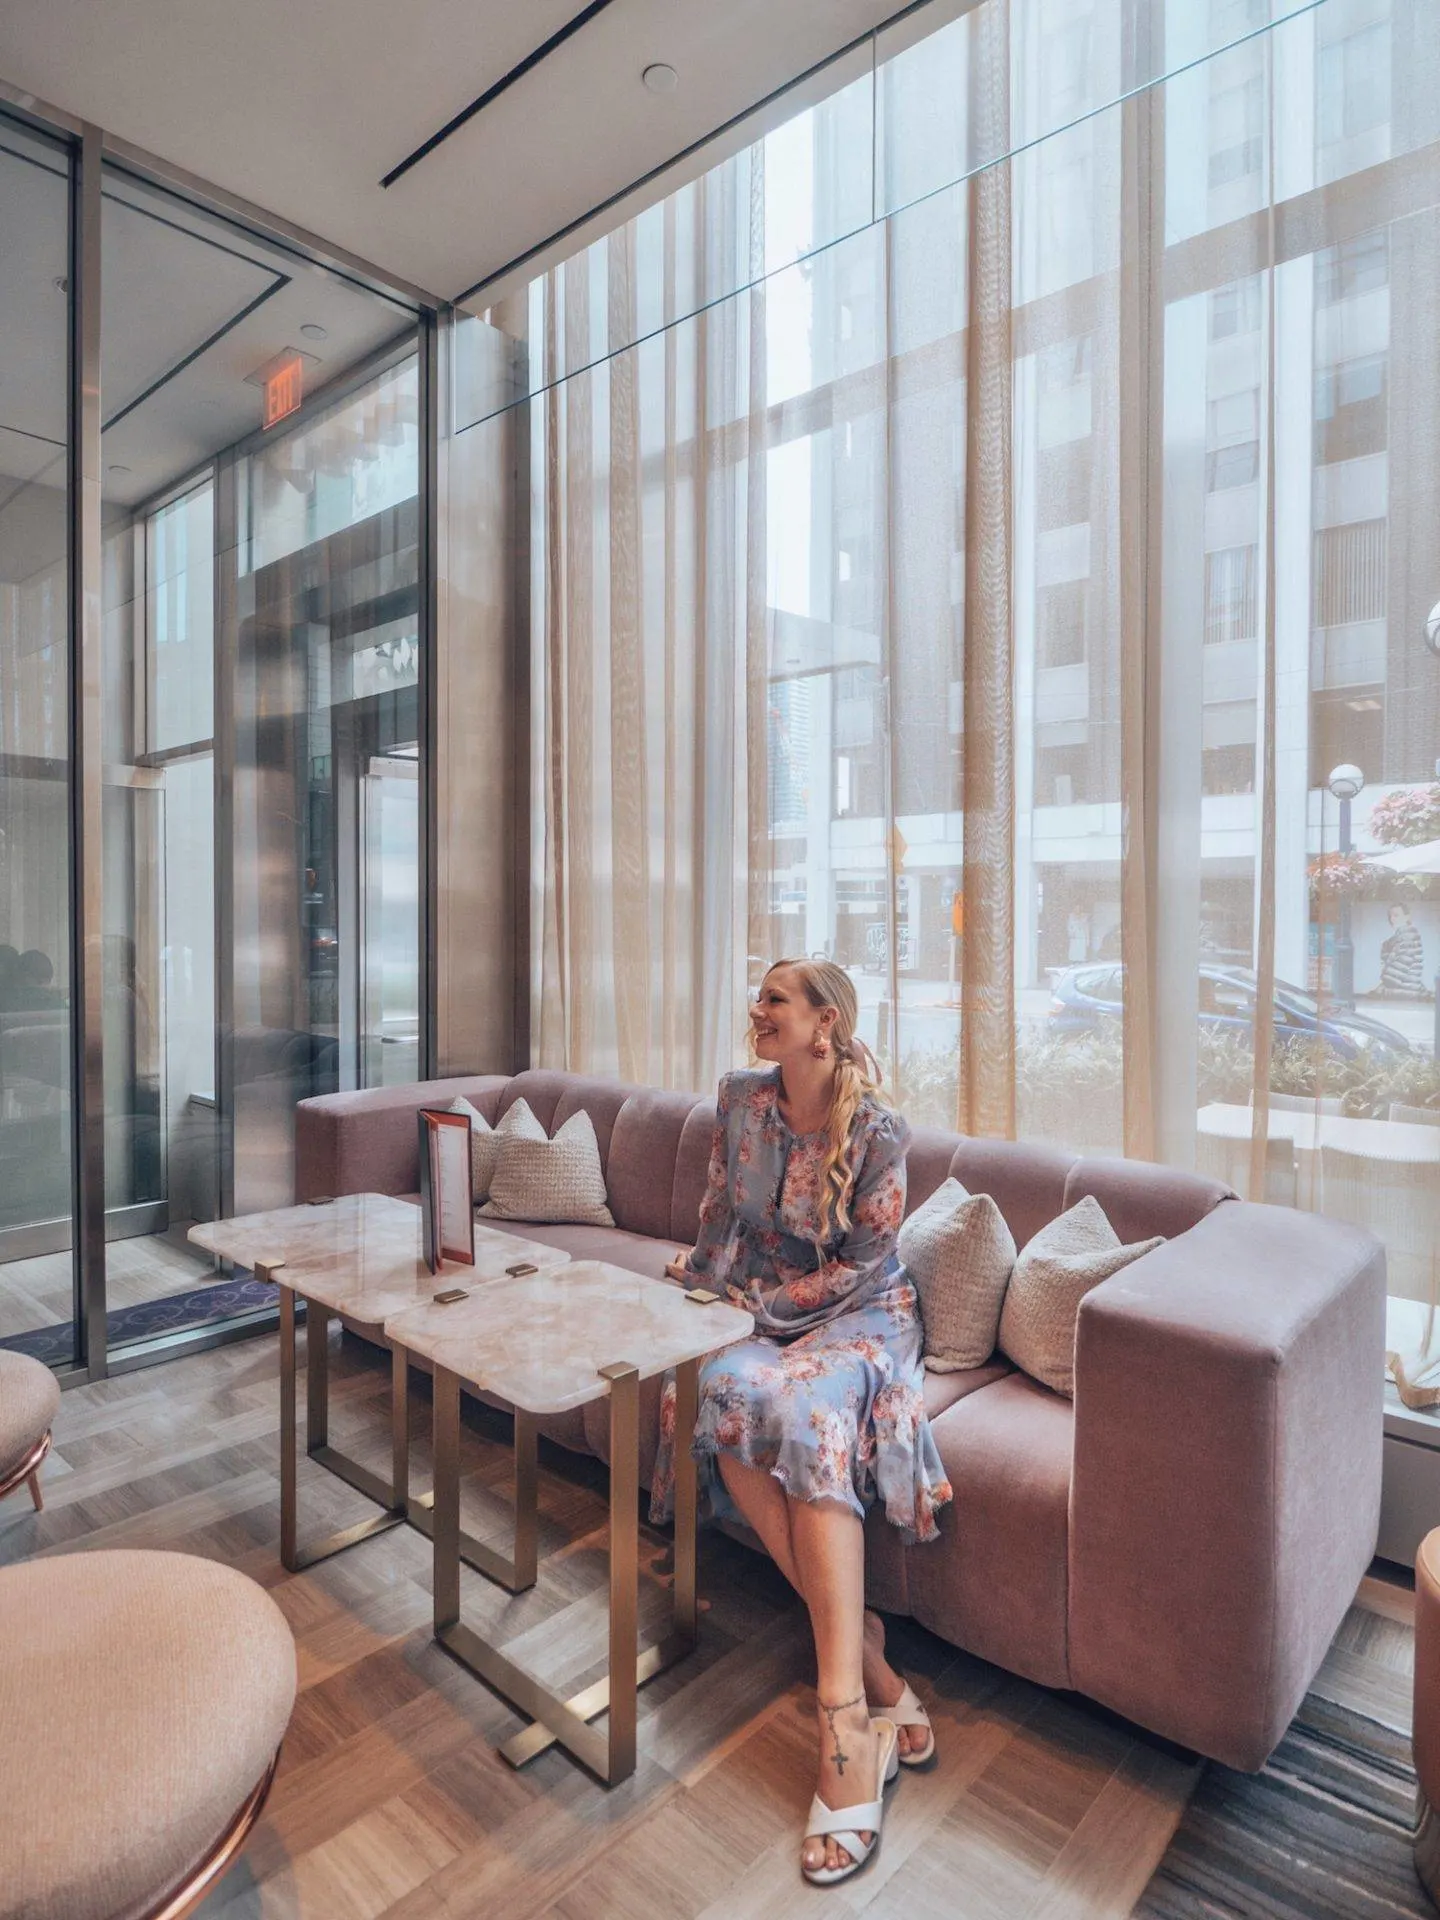 Pop into D-Bar in the Four Seasons Toronto for cocktails. Click to read the rest of the review and 18 reasons you'll love staying at this hotel!